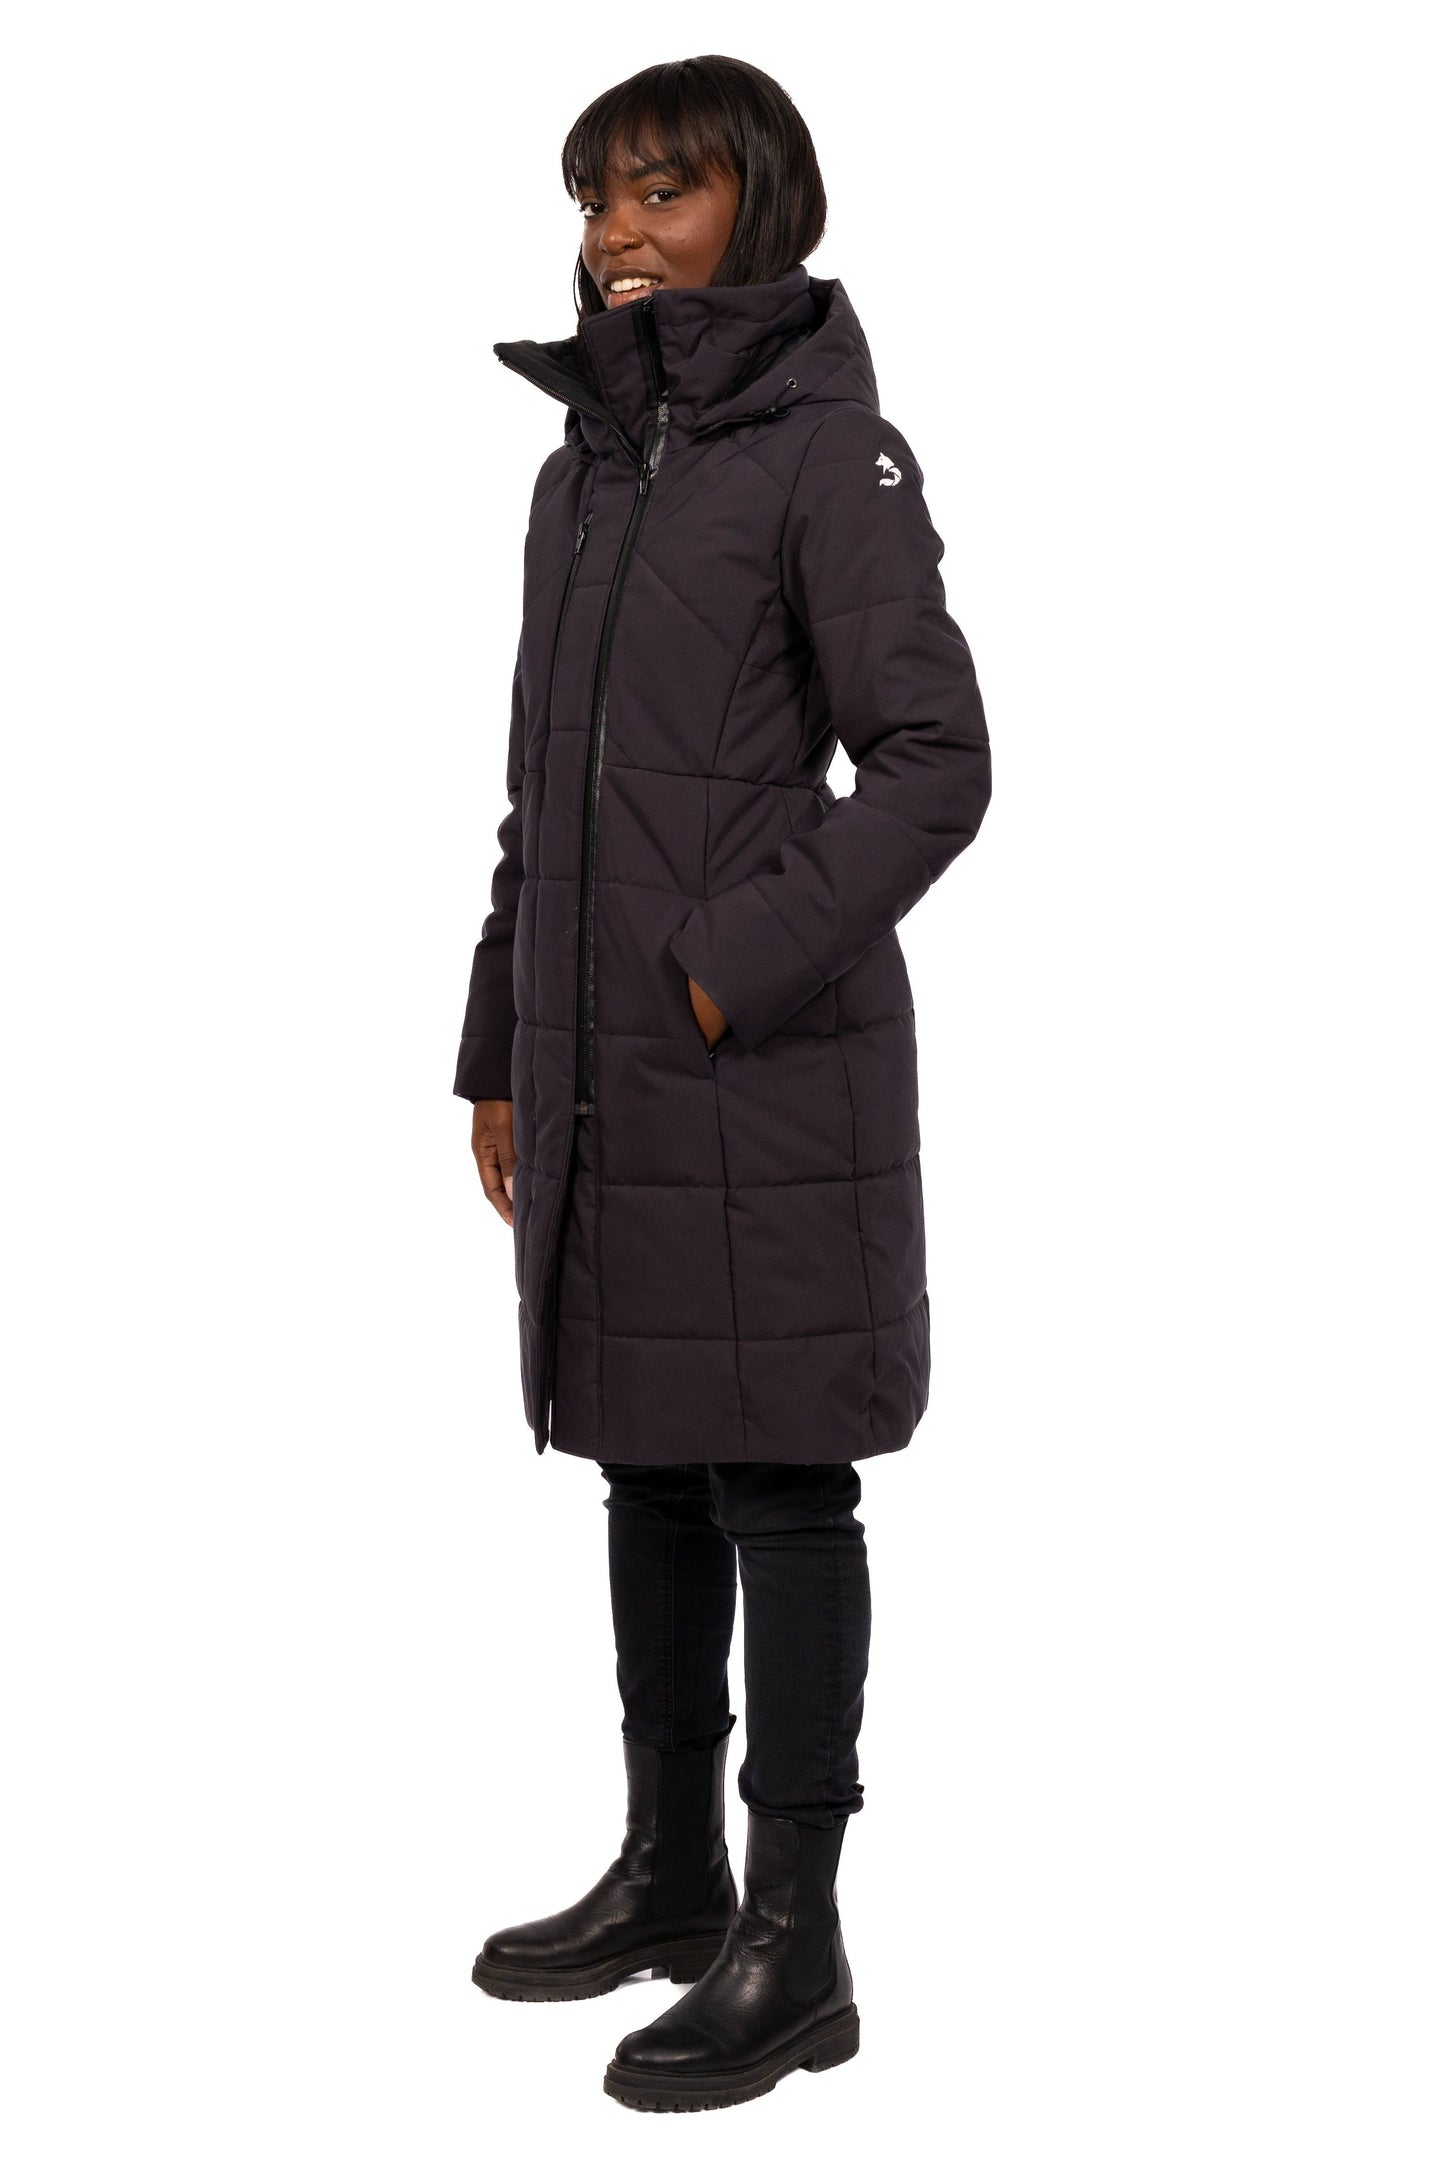 Desloups long women's parka fitted in Isosoft 250g